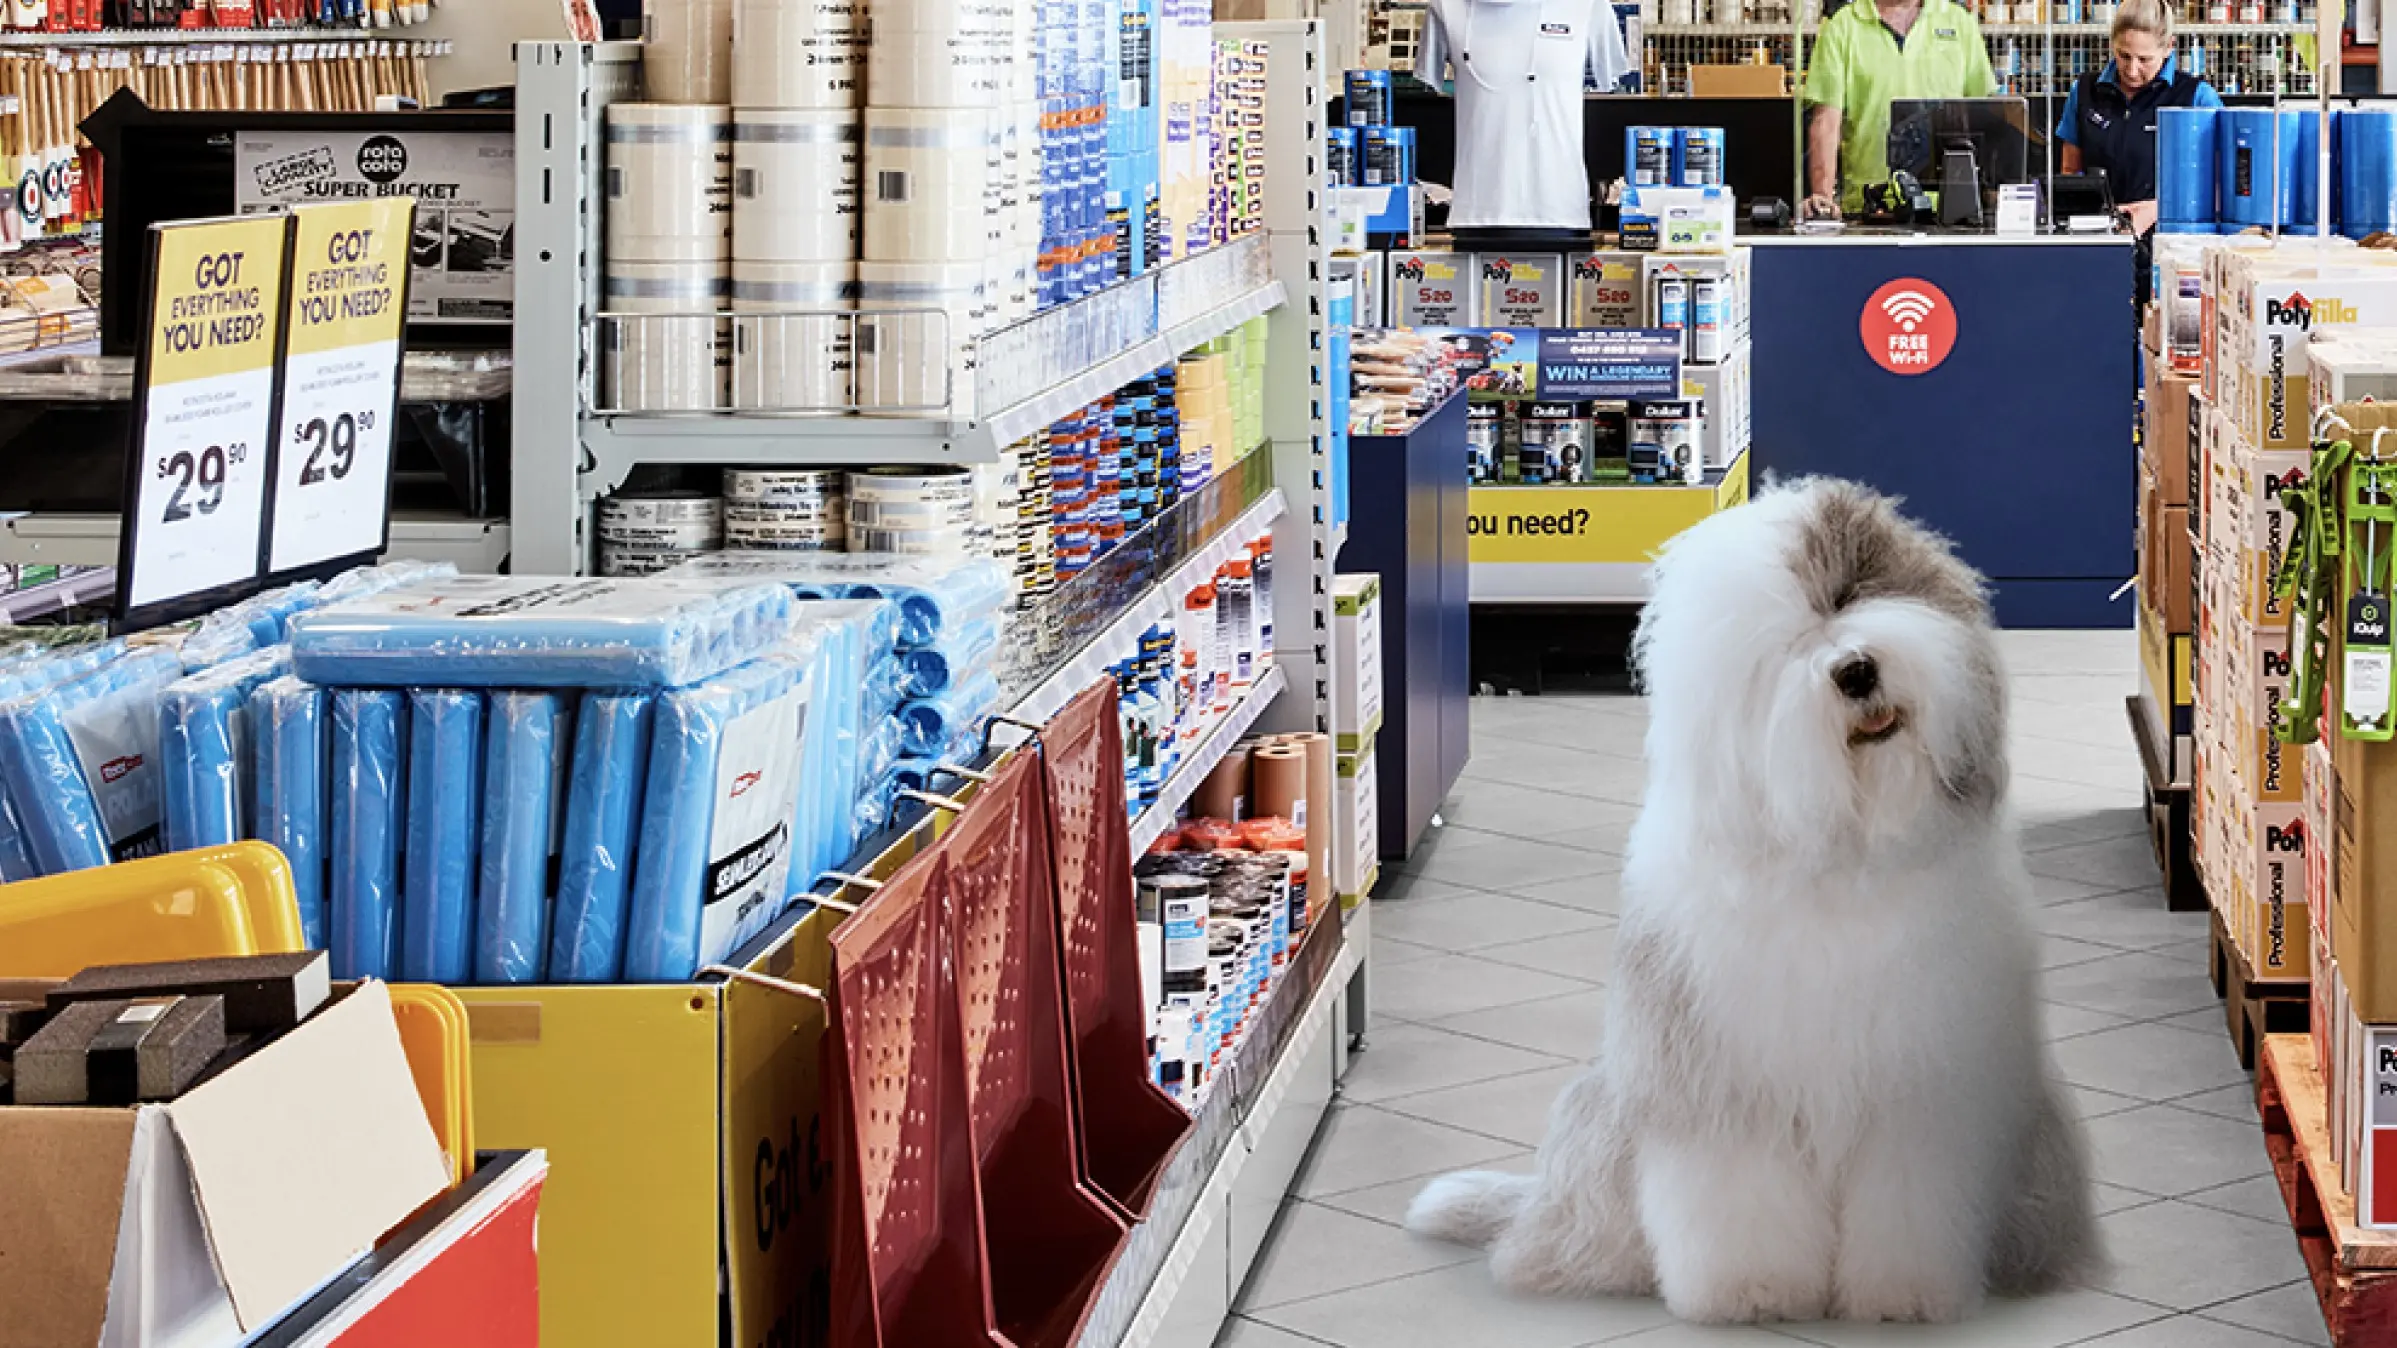 Dulux dog in trade store aisle